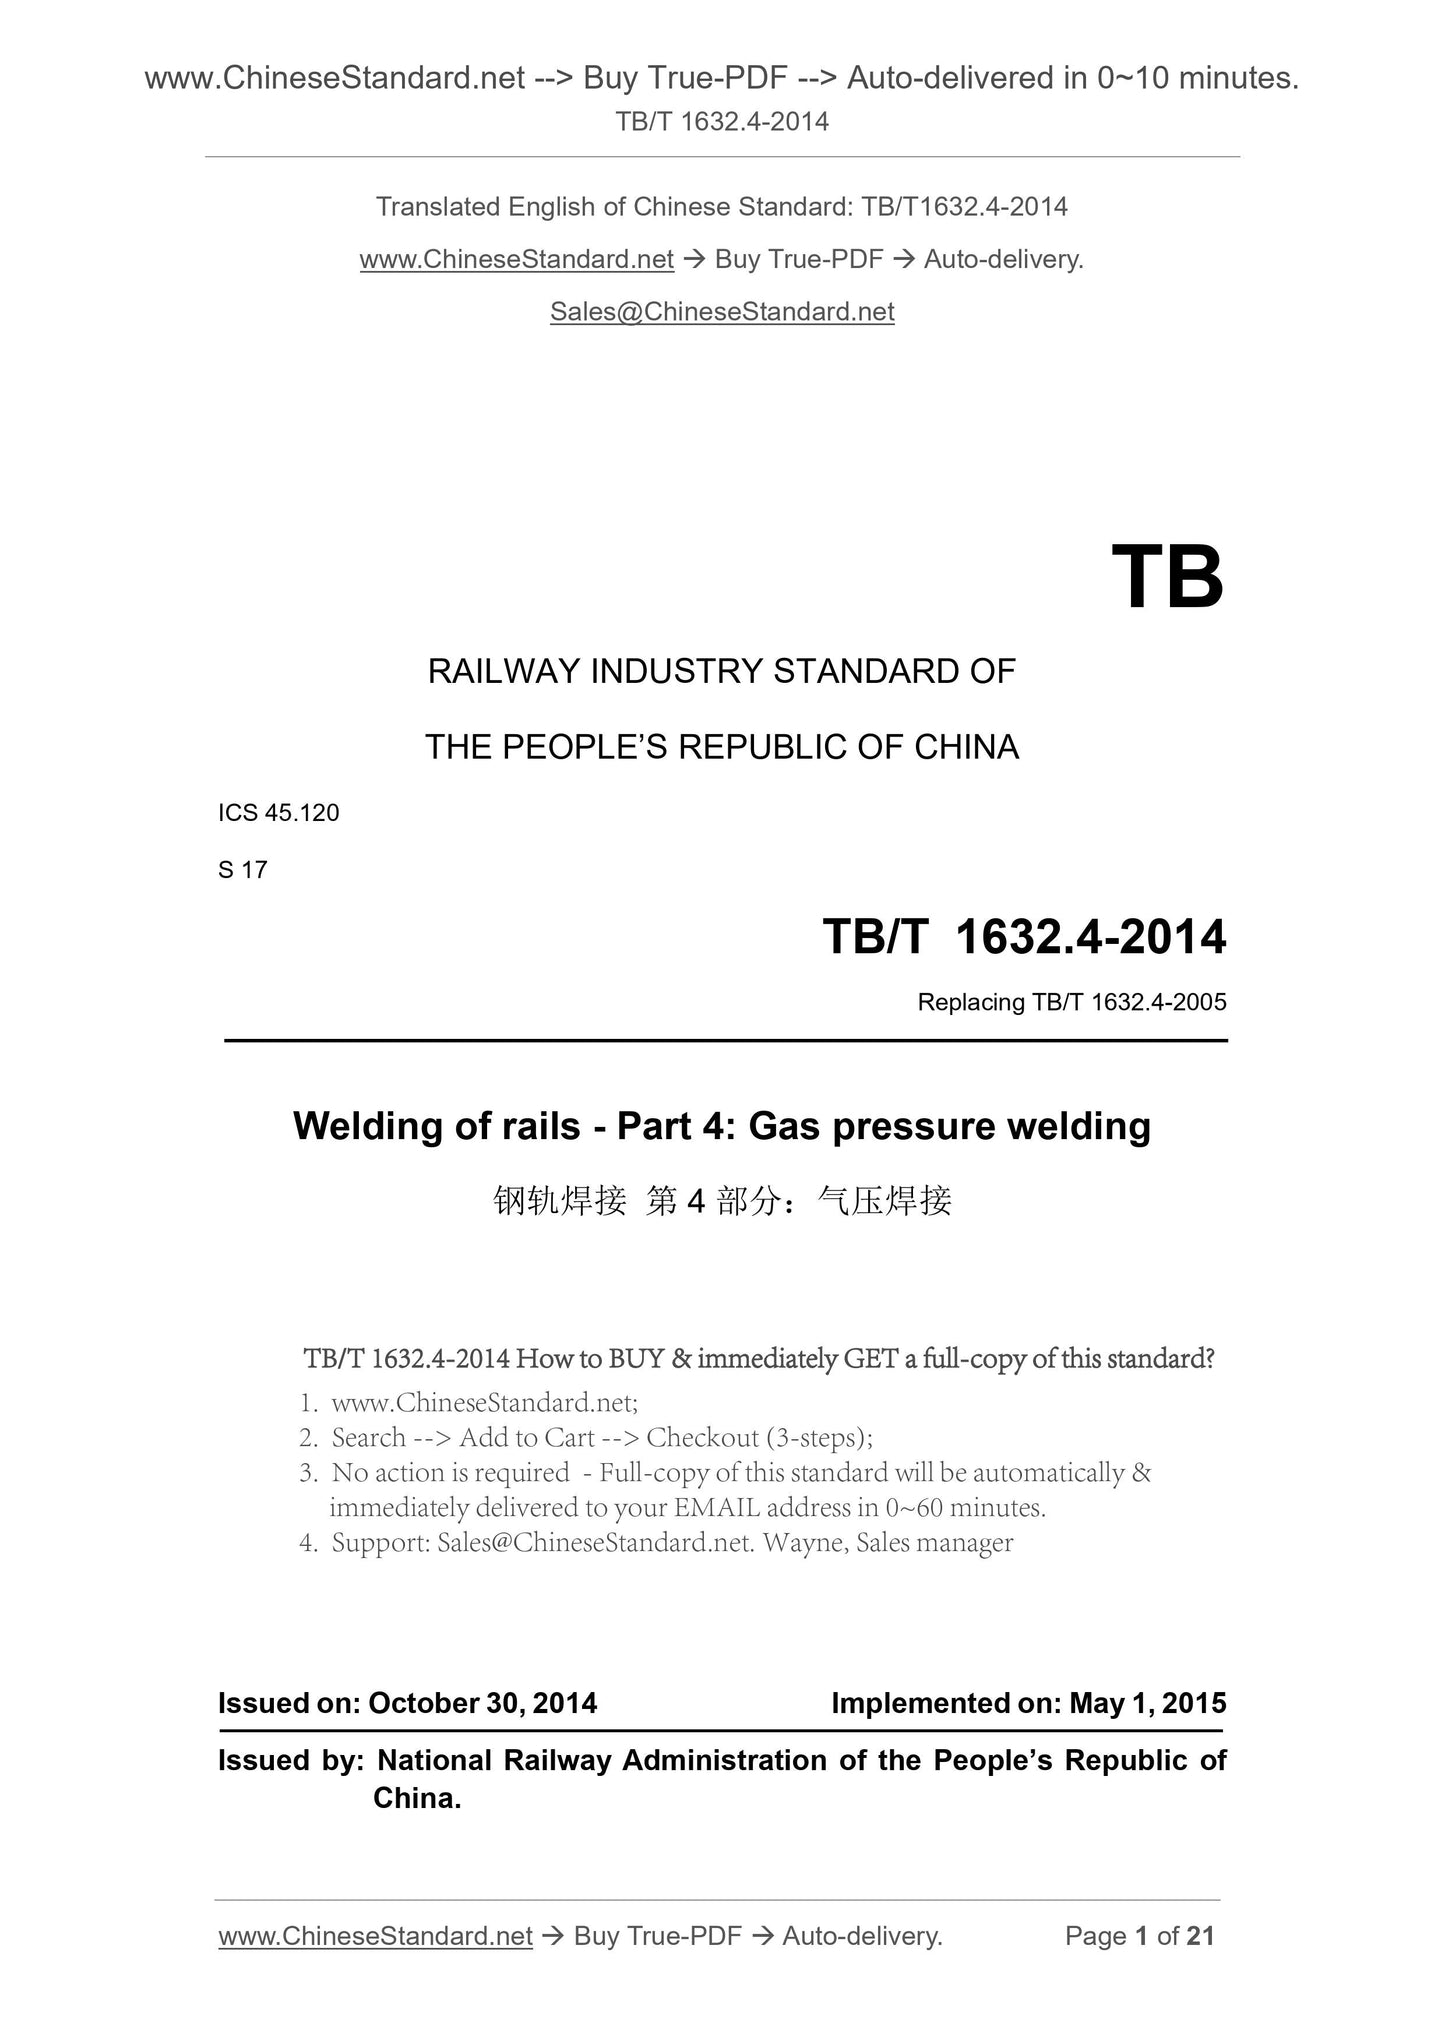 TB/T 1632.4-2014 Page 1